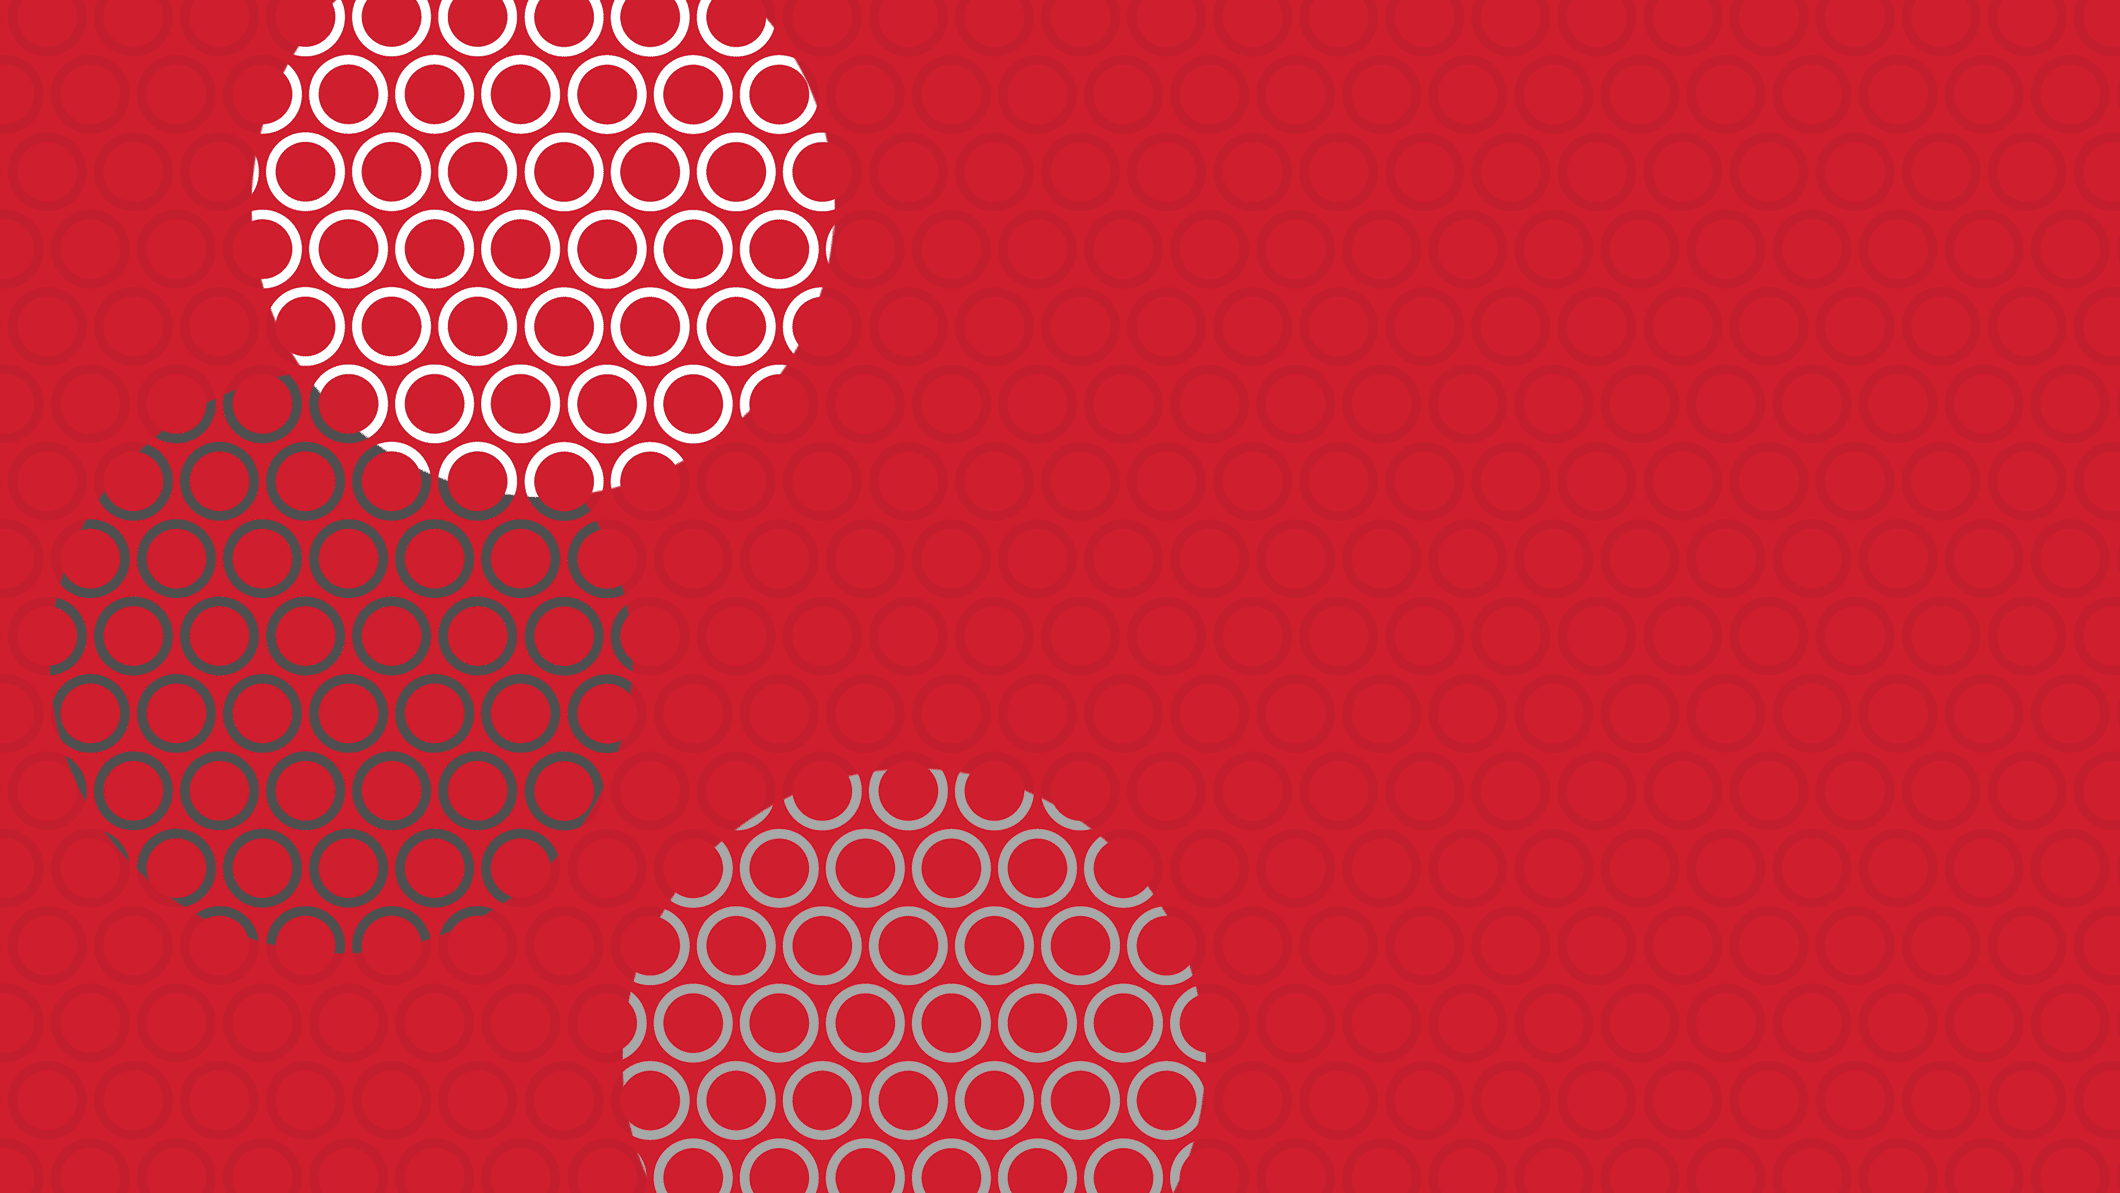 circle pattern on red background